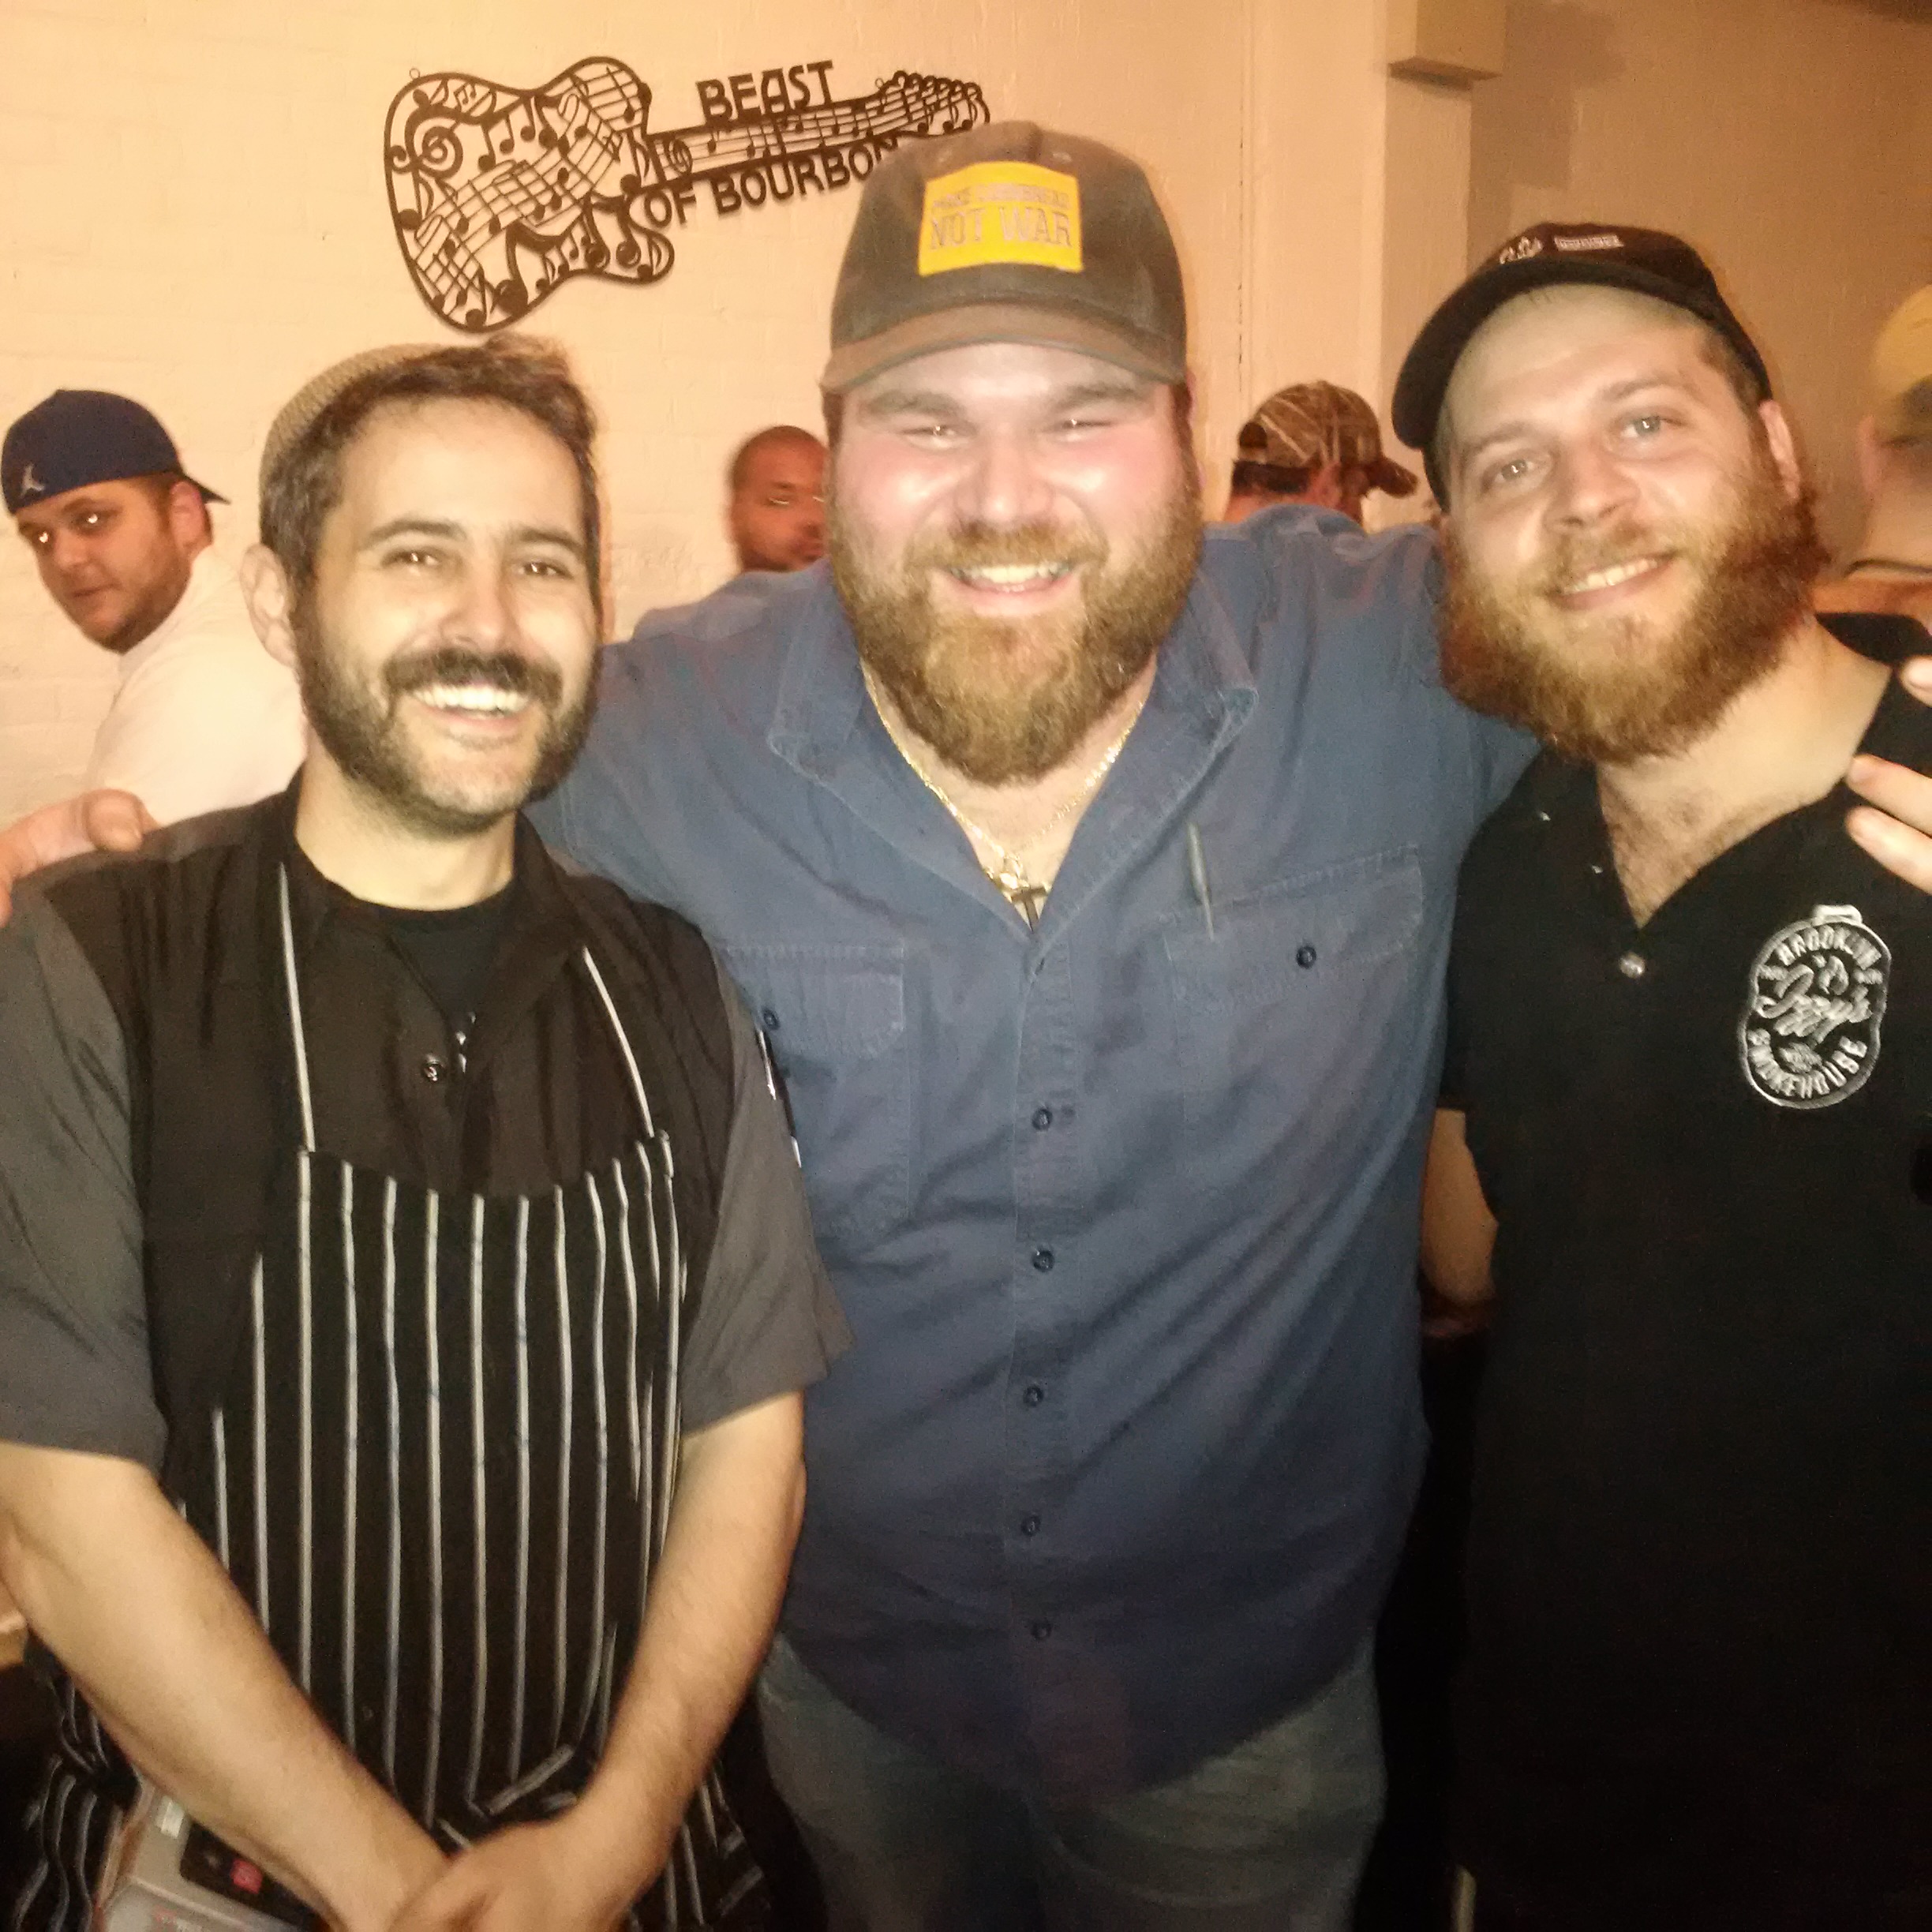 Ari White (left) of The Wandering Que was crowned 2016 Brisket King of NYC.